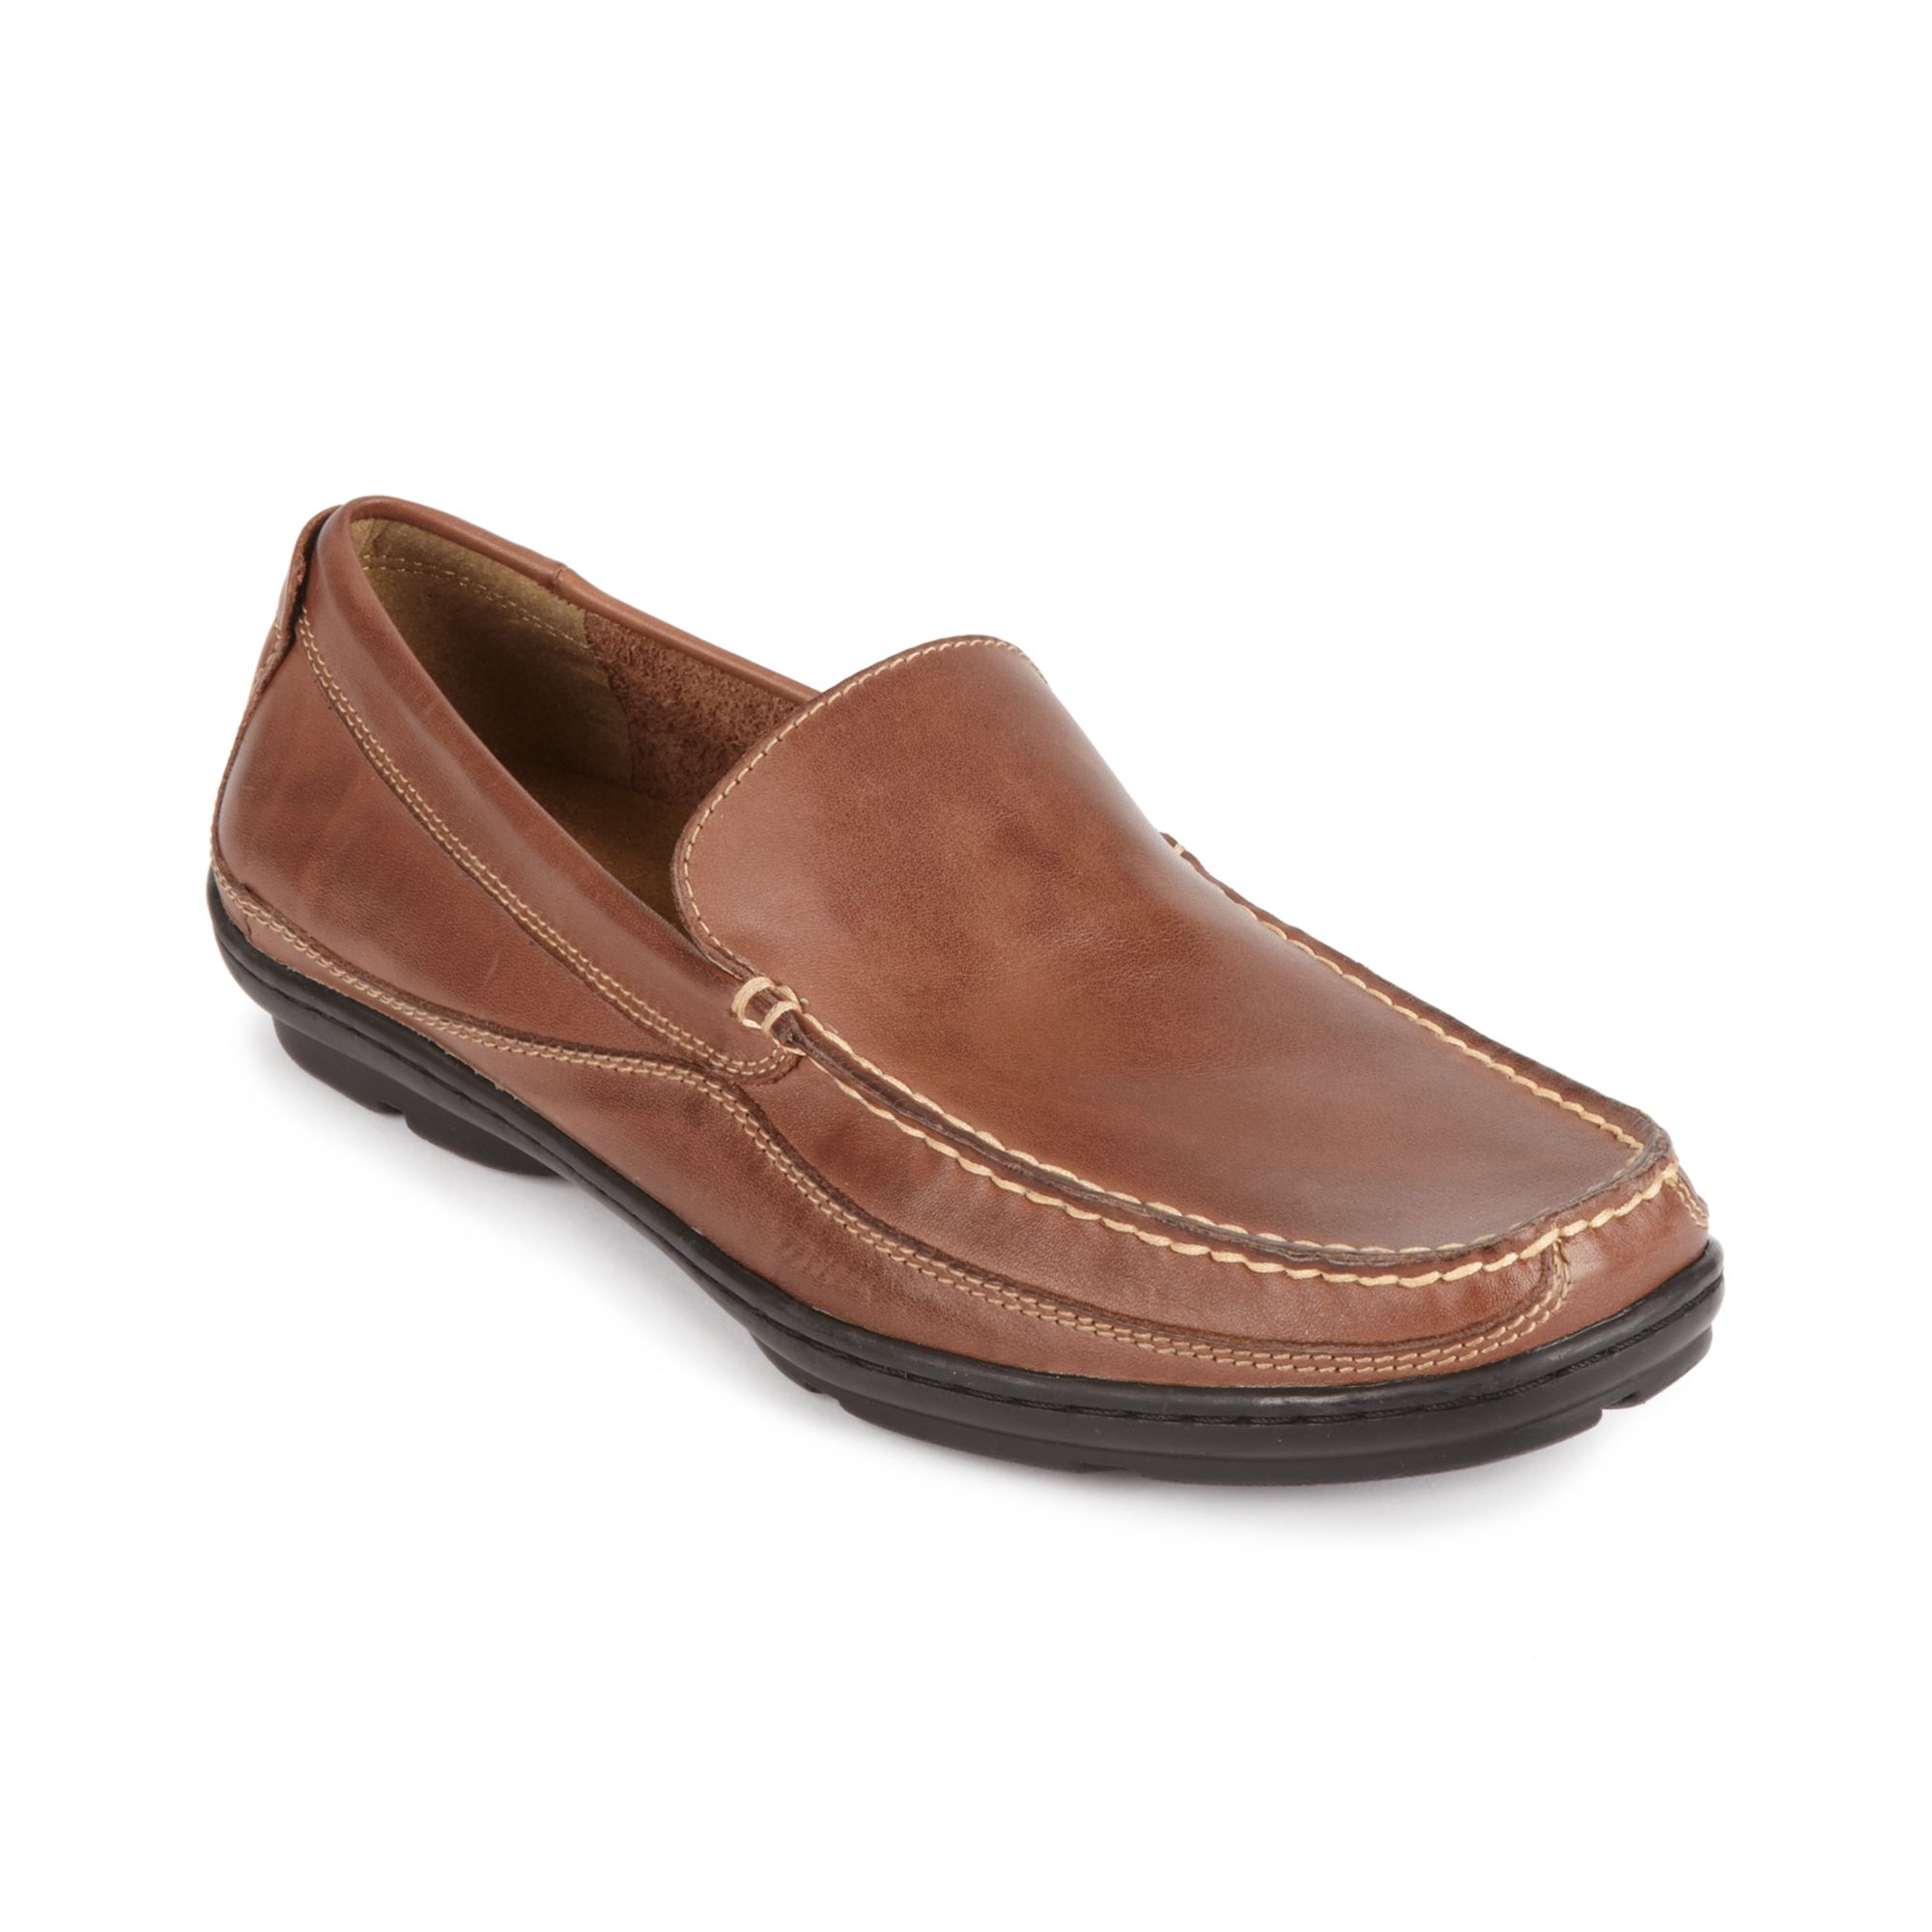 Dockers Clifford Driver Shoes in Dark Tan (Brown) for Men - Lyst